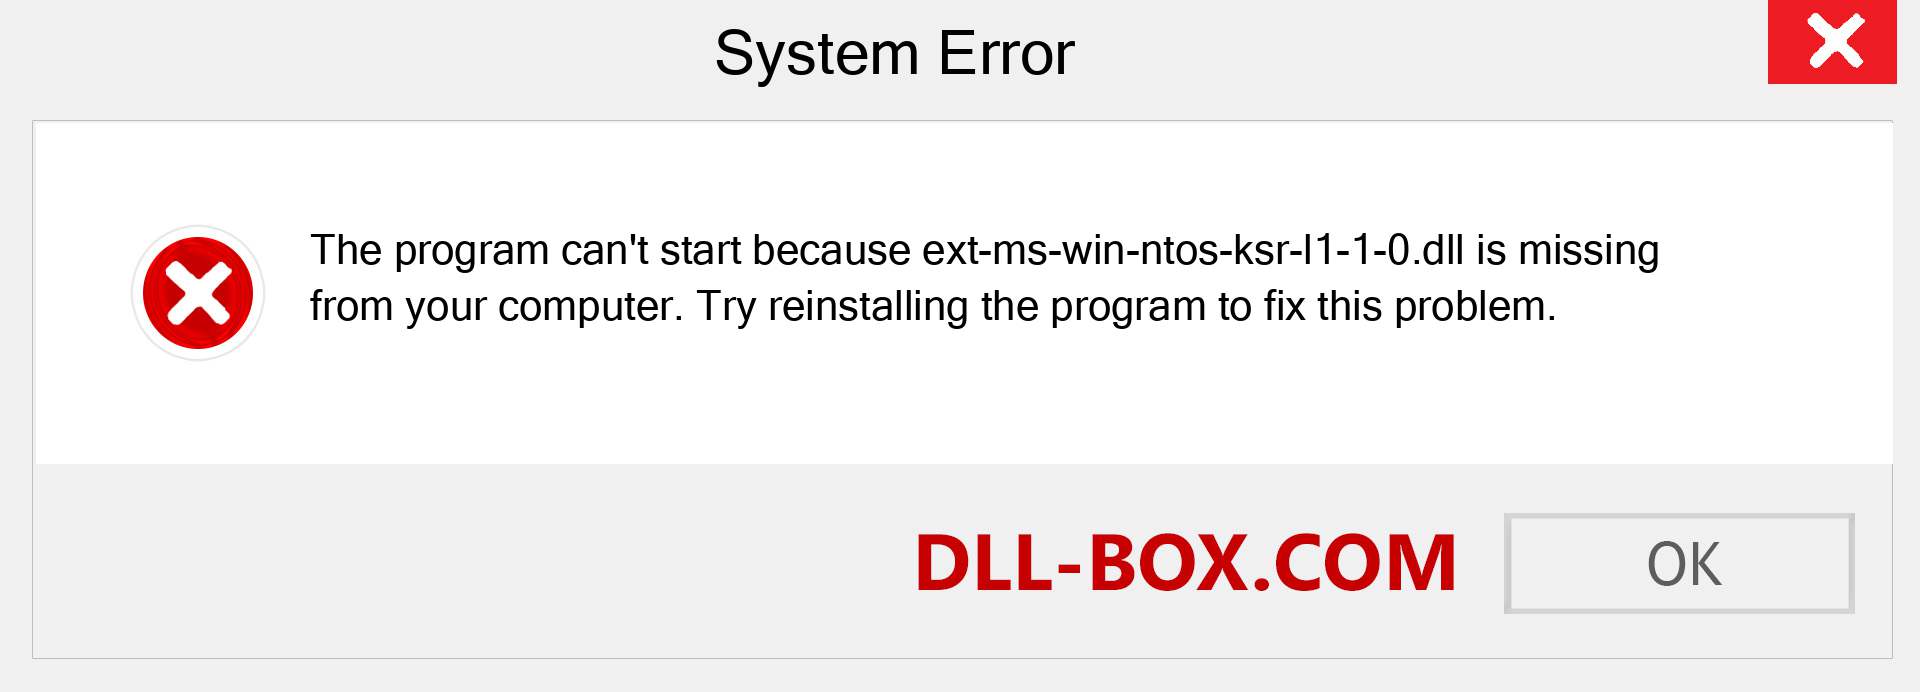  ext-ms-win-ntos-ksr-l1-1-0.dll file is missing?. Download for Windows 7, 8, 10 - Fix  ext-ms-win-ntos-ksr-l1-1-0 dll Missing Error on Windows, photos, images